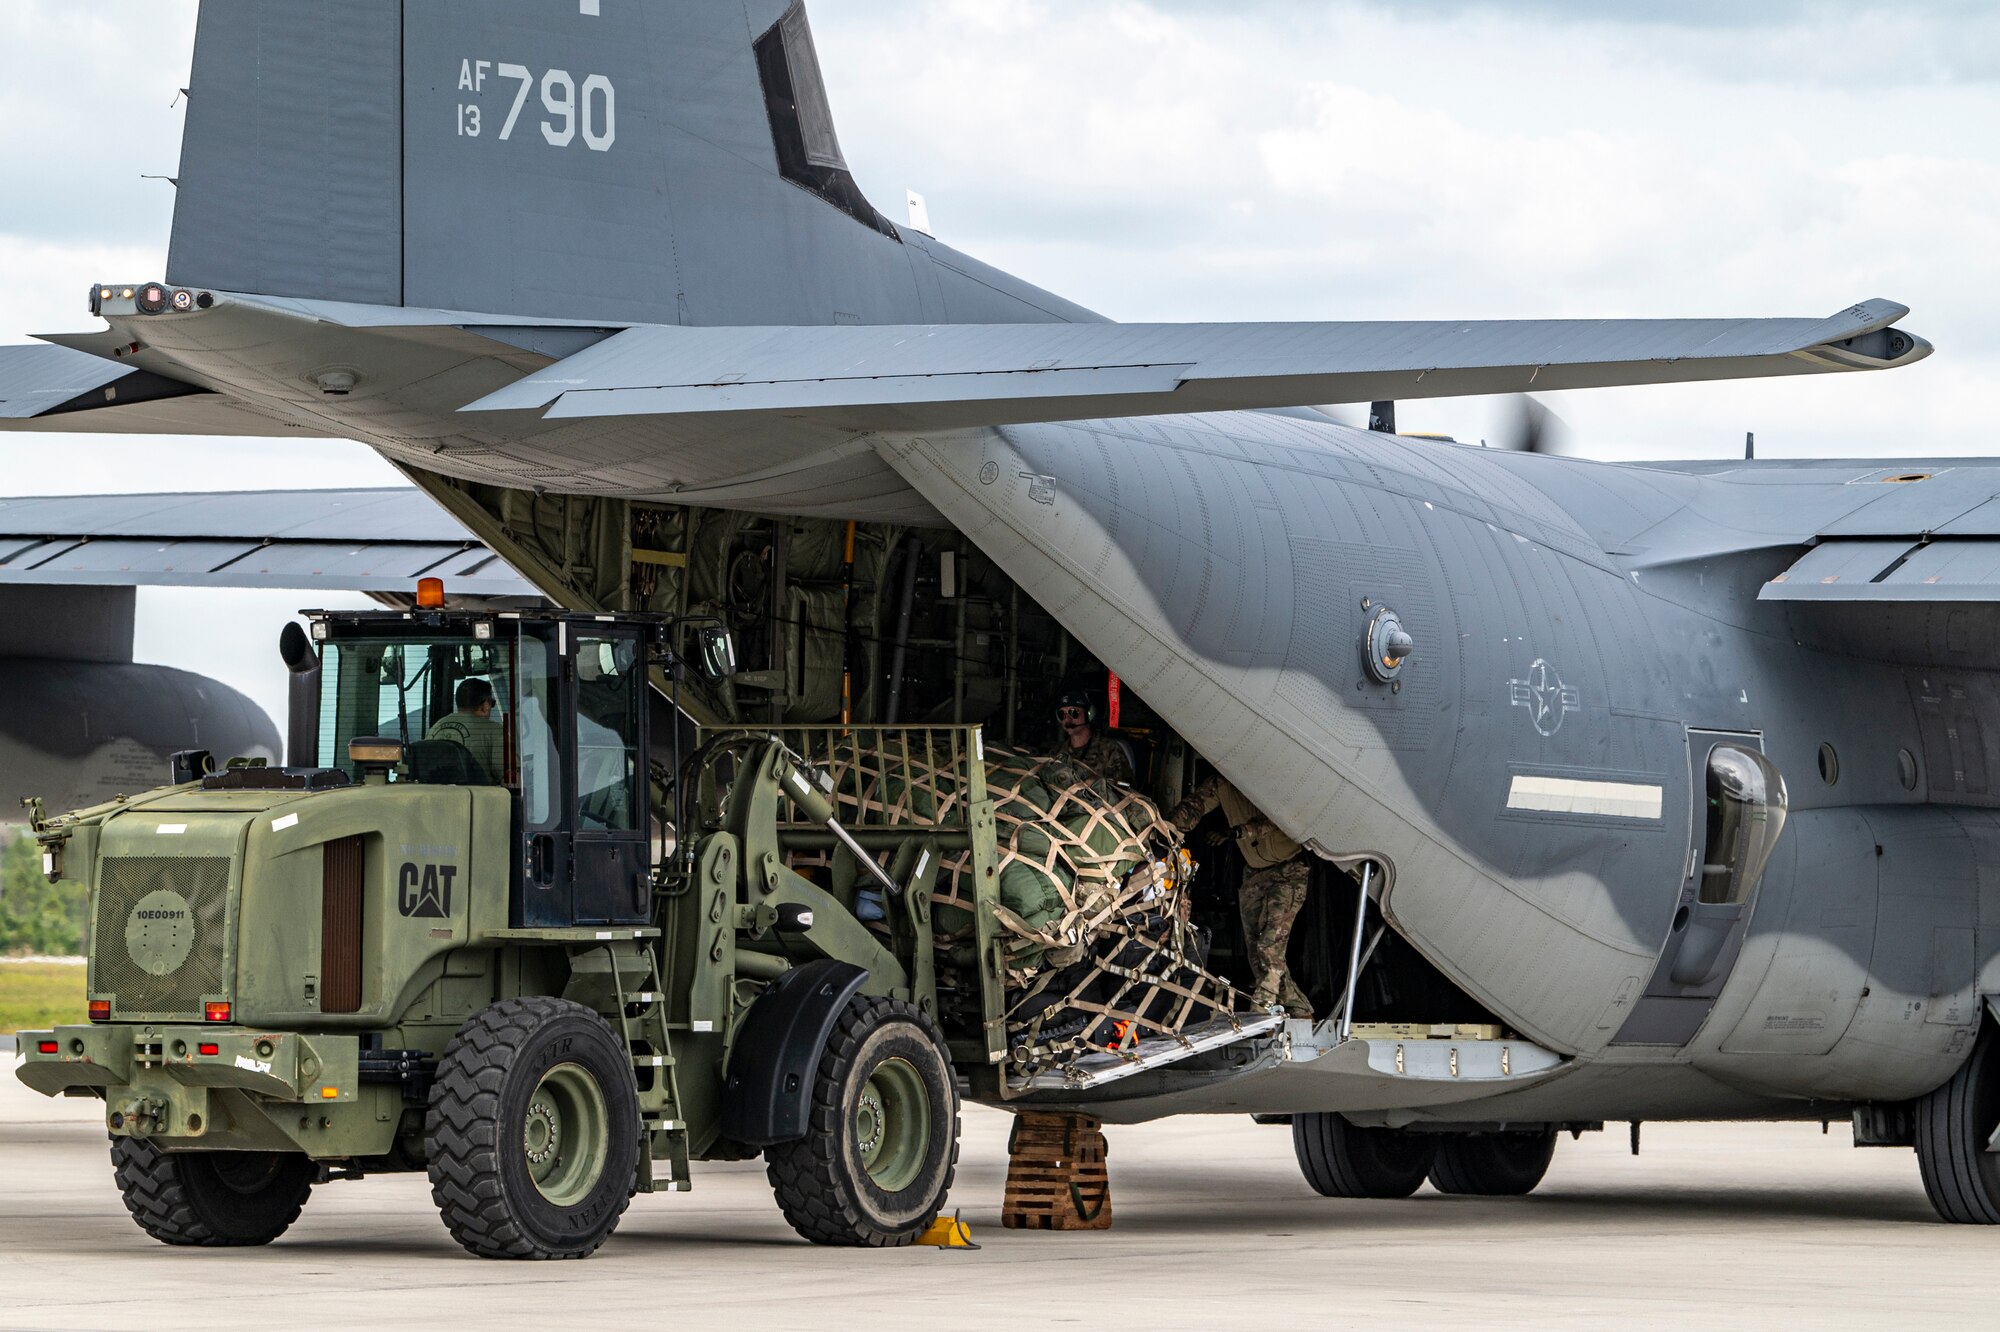 U.S. Air Force Airmen assigned to 23rd Logistics Readiness Squadron pick up cargo from an HC-130J Combat King II at Avon Park Air Force Range, Florida, for exercise Ready Tiger 24-1, April 9, 2024. Airmen deploying to austere locations must quickly and rapidly bring essential supplies and equipment to ensure mission success.  (U.S. Air Force photo by Airman 1st Class Leonid Soubbotine)